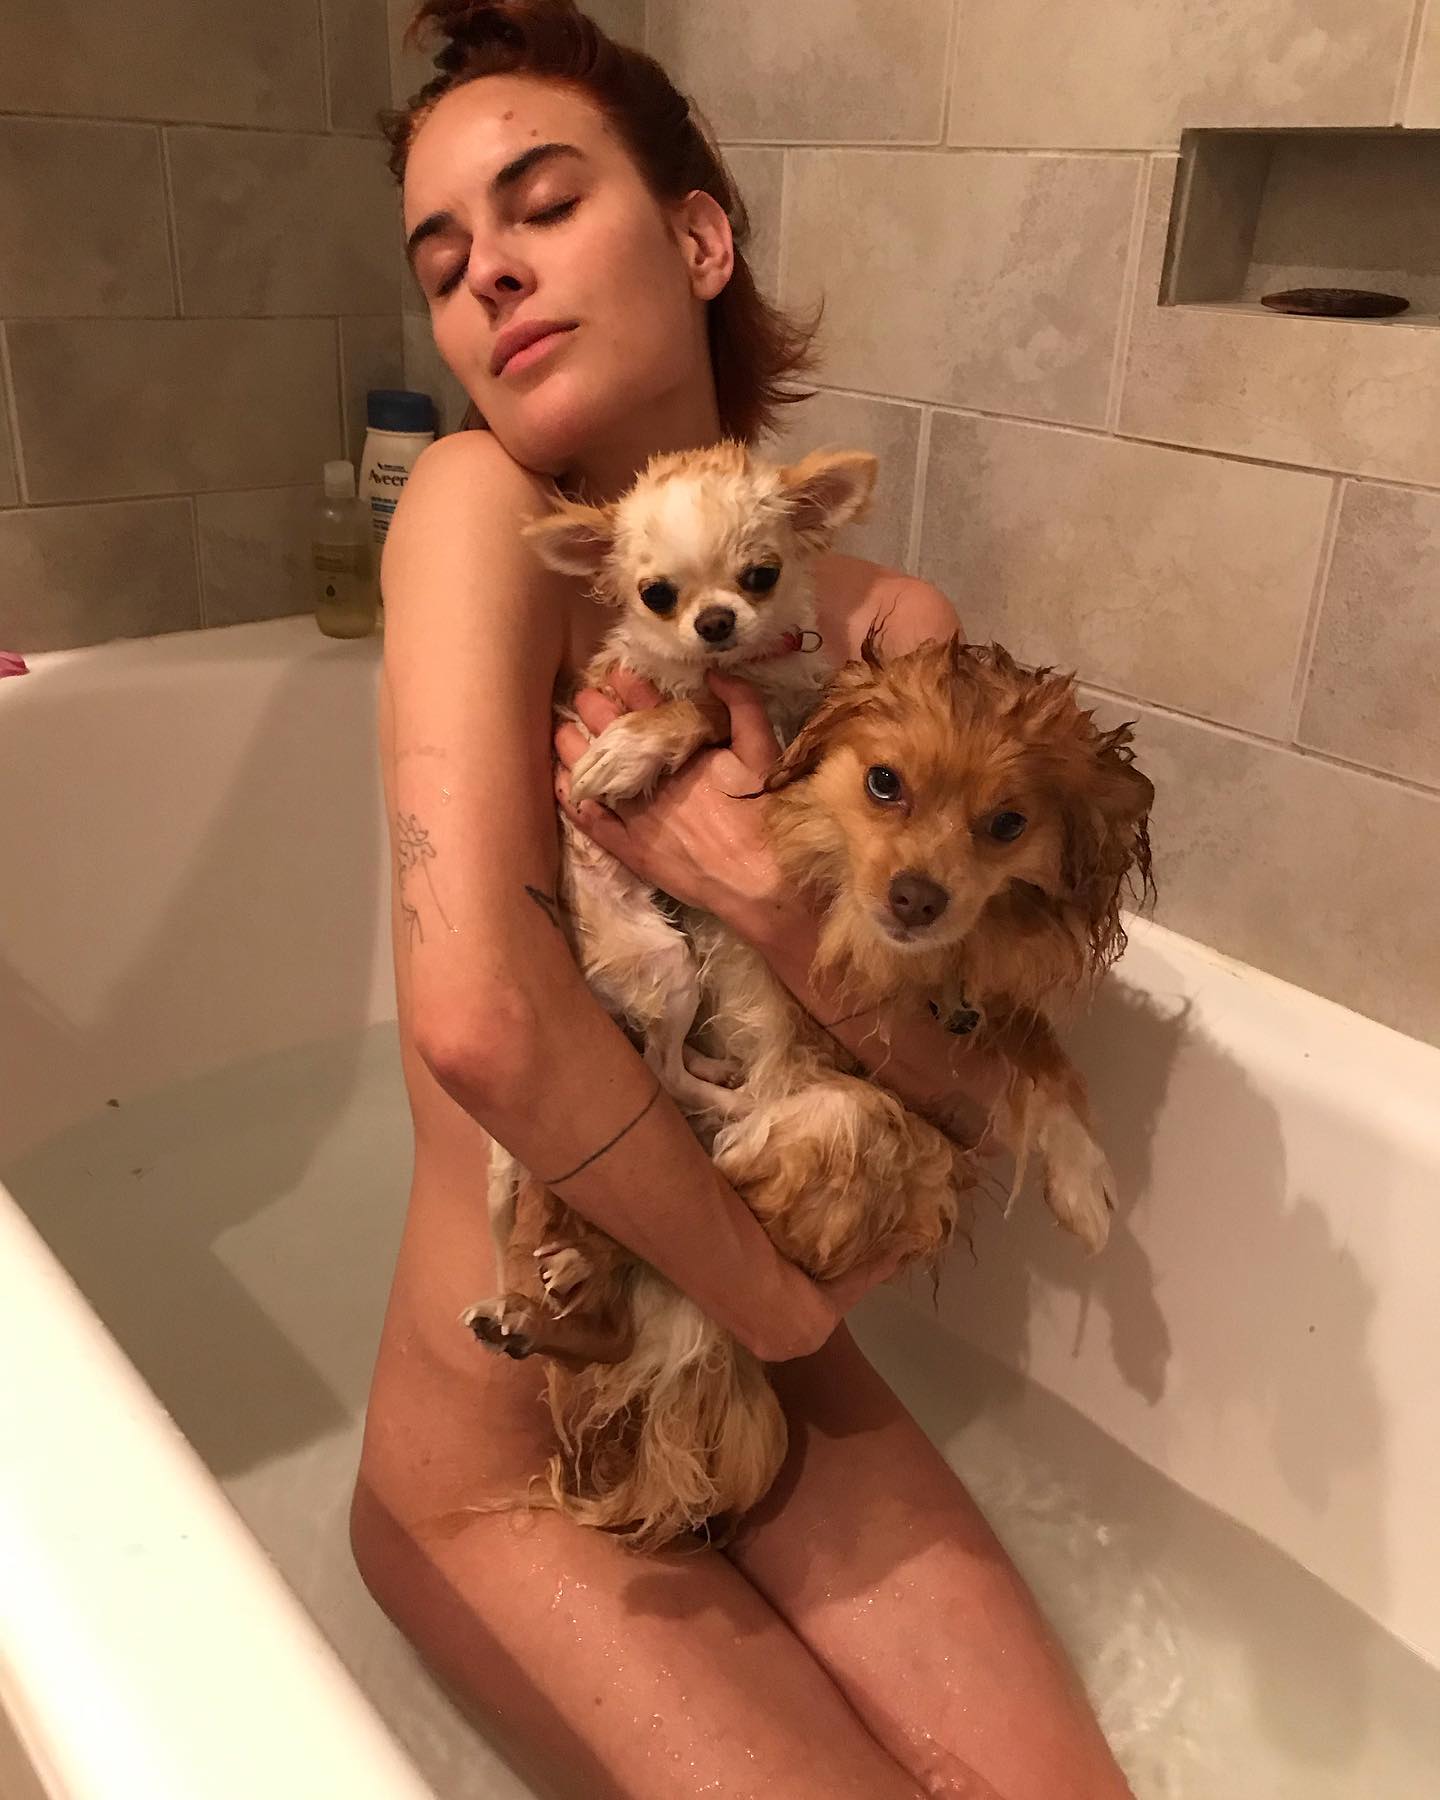 Sexy Tallulah Willis Posing Naked and Looking Slutty for the Camera.